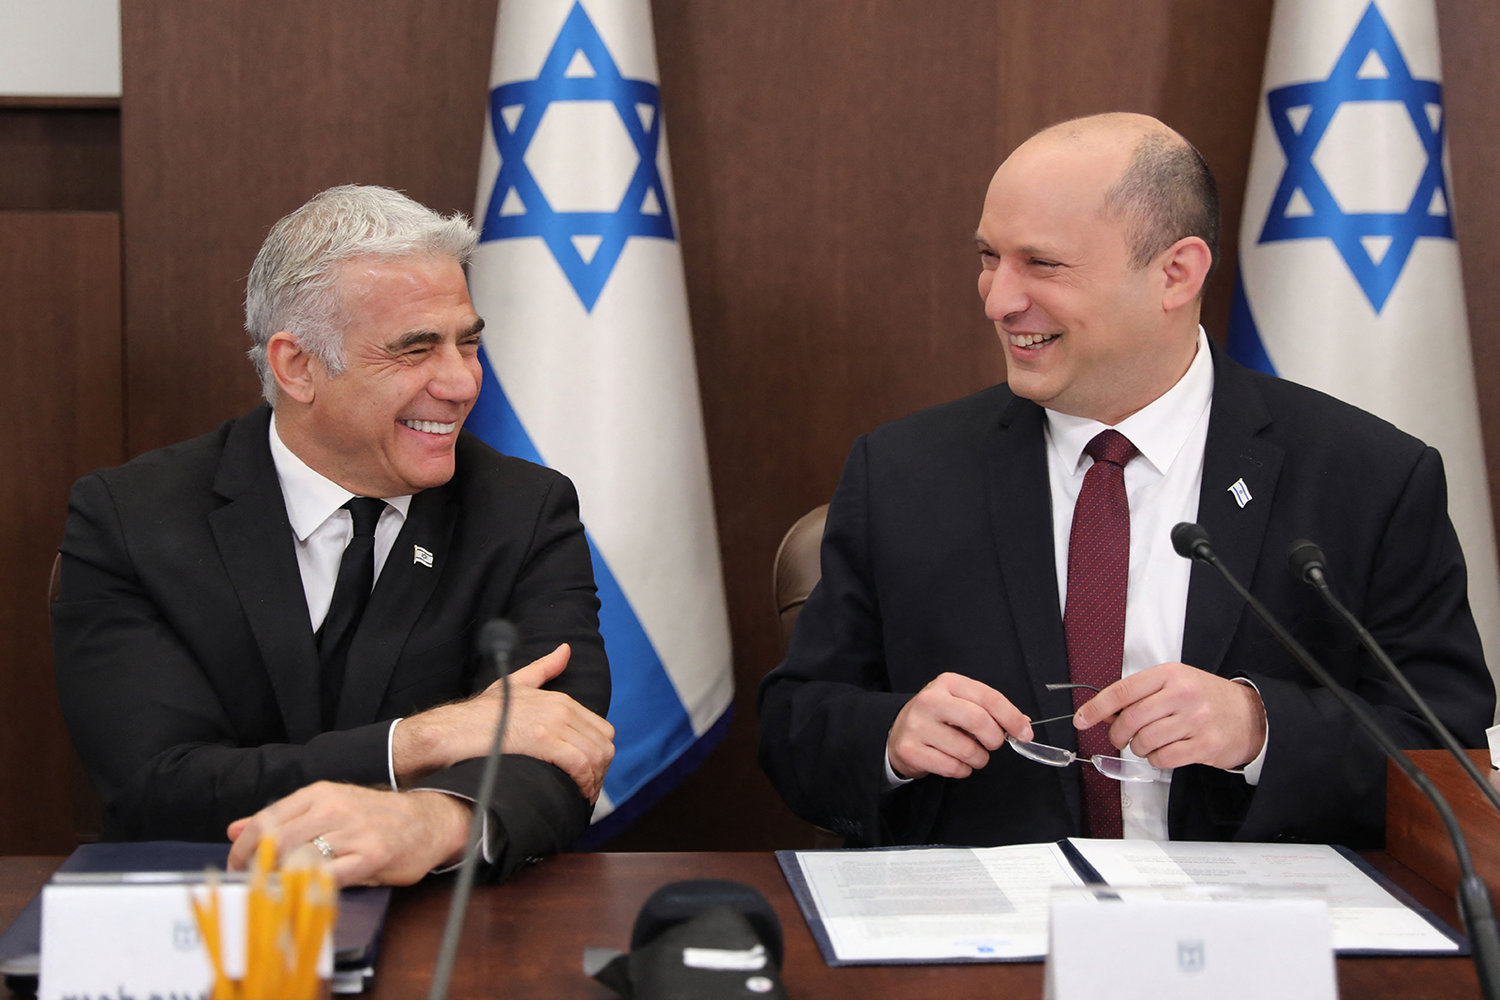 Israeli Prime Minister Naftali Bennett (right) speaks with Foreign Minister Yair Lapid (left) during a cabinet meeting at the Prime minister's office in Jerusalem, on June 19, 2022. (Abir Sultan/Pool/AFP via Getty Images/TNS)